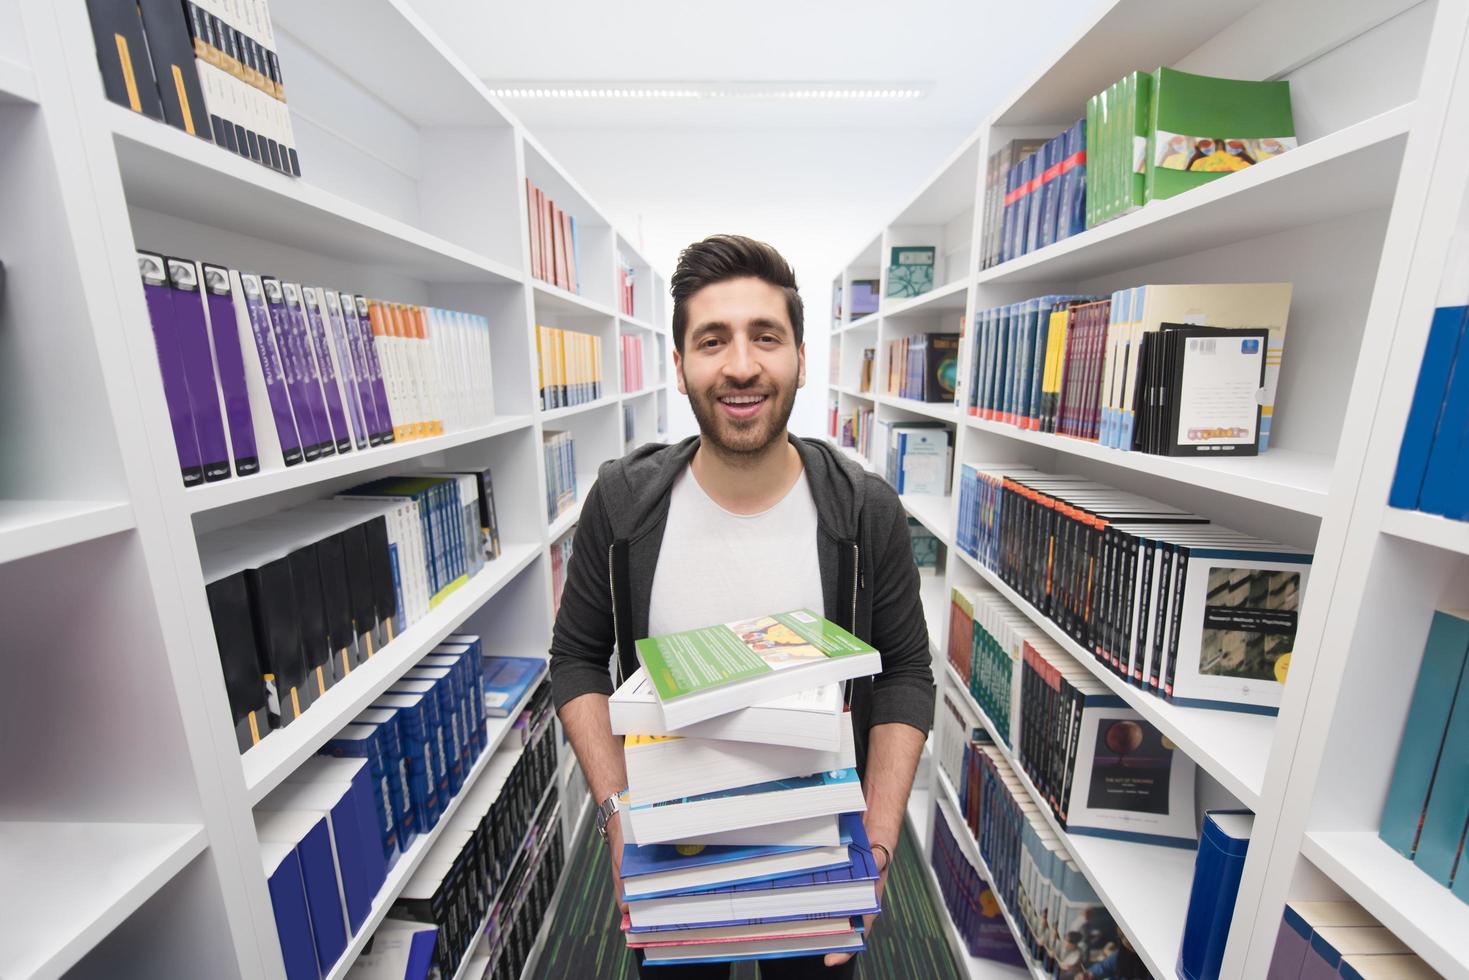 Student holding lot of books in school library photo